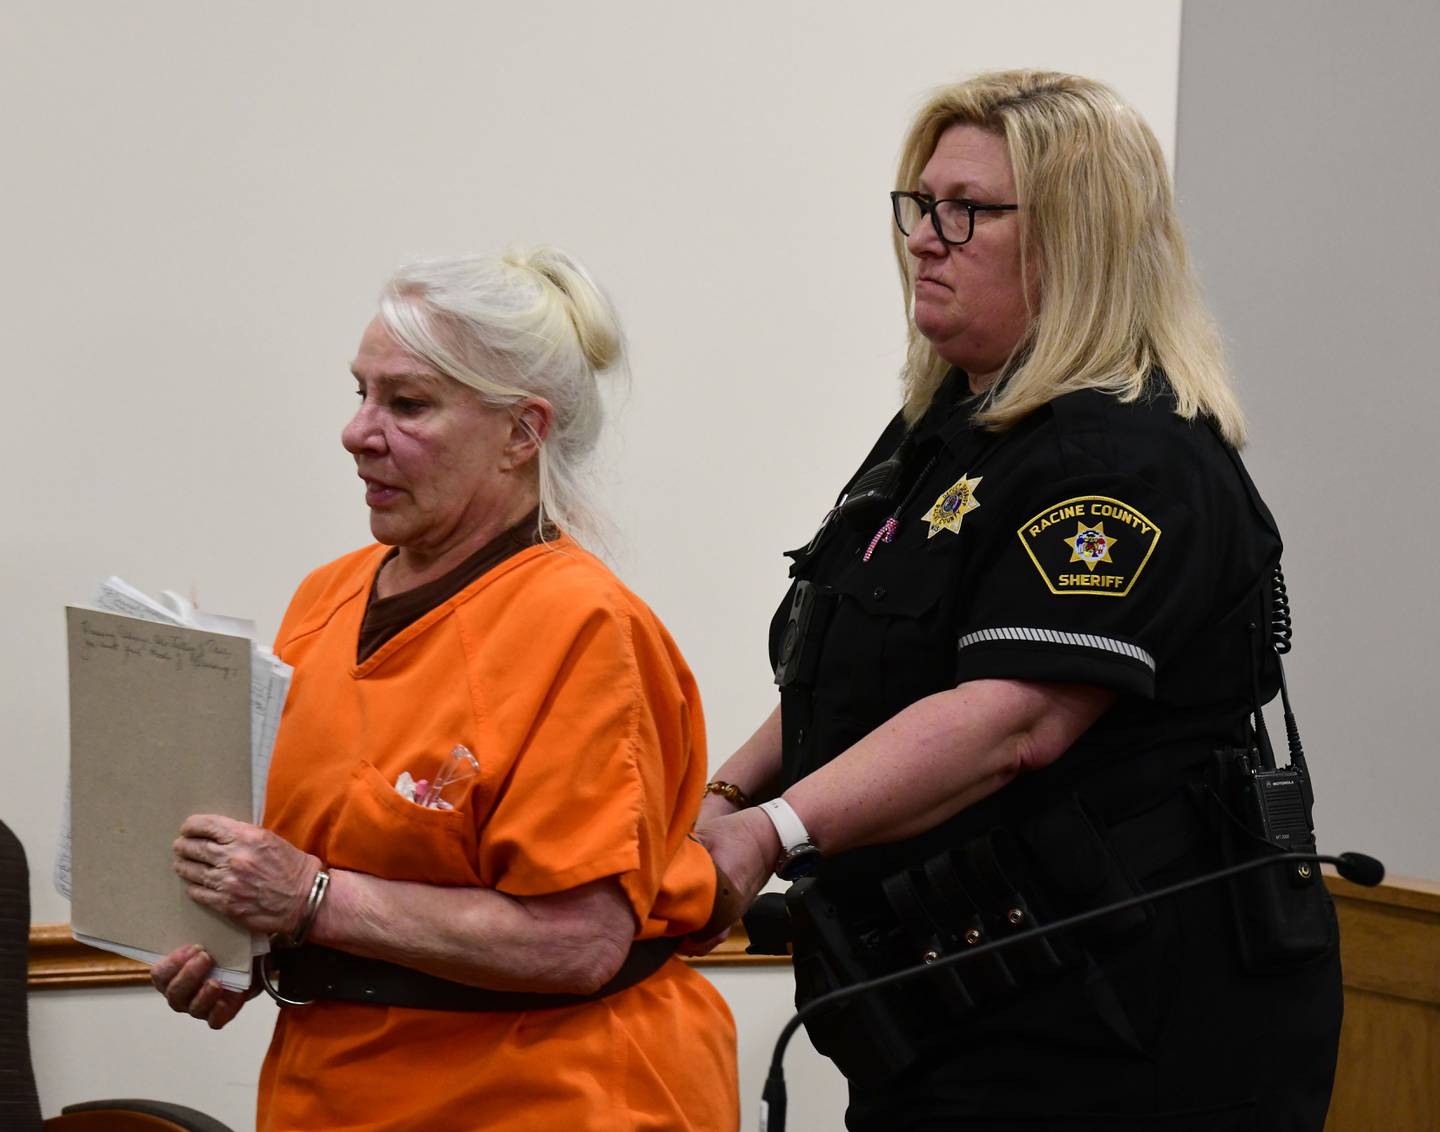 Linda La Roche is led back to jail Monday, May 23, 2022, after her sentencing hearing in Racine County. She was sentenced to life in prison without parole for the murder of Peggy Lynn Johnson-Schroeder in 1999 and a consecutive five-year sentence of concealing a corpse.